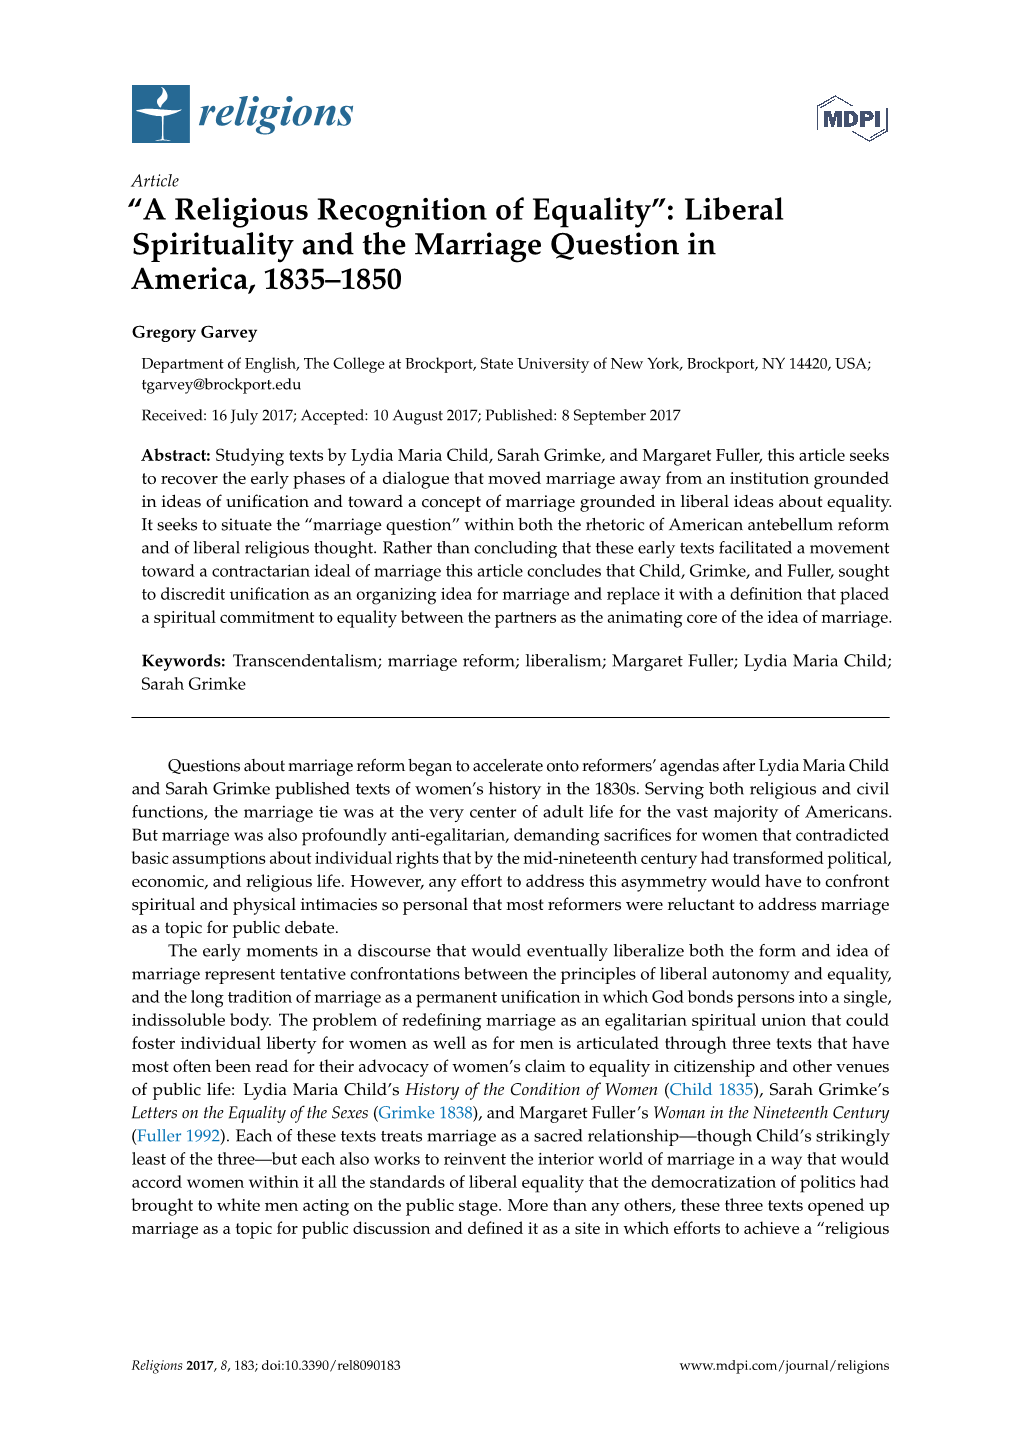 “A Religious Recognition of Equality”: Liberal Spirituality and the Marriage Question in America, 1835–1850